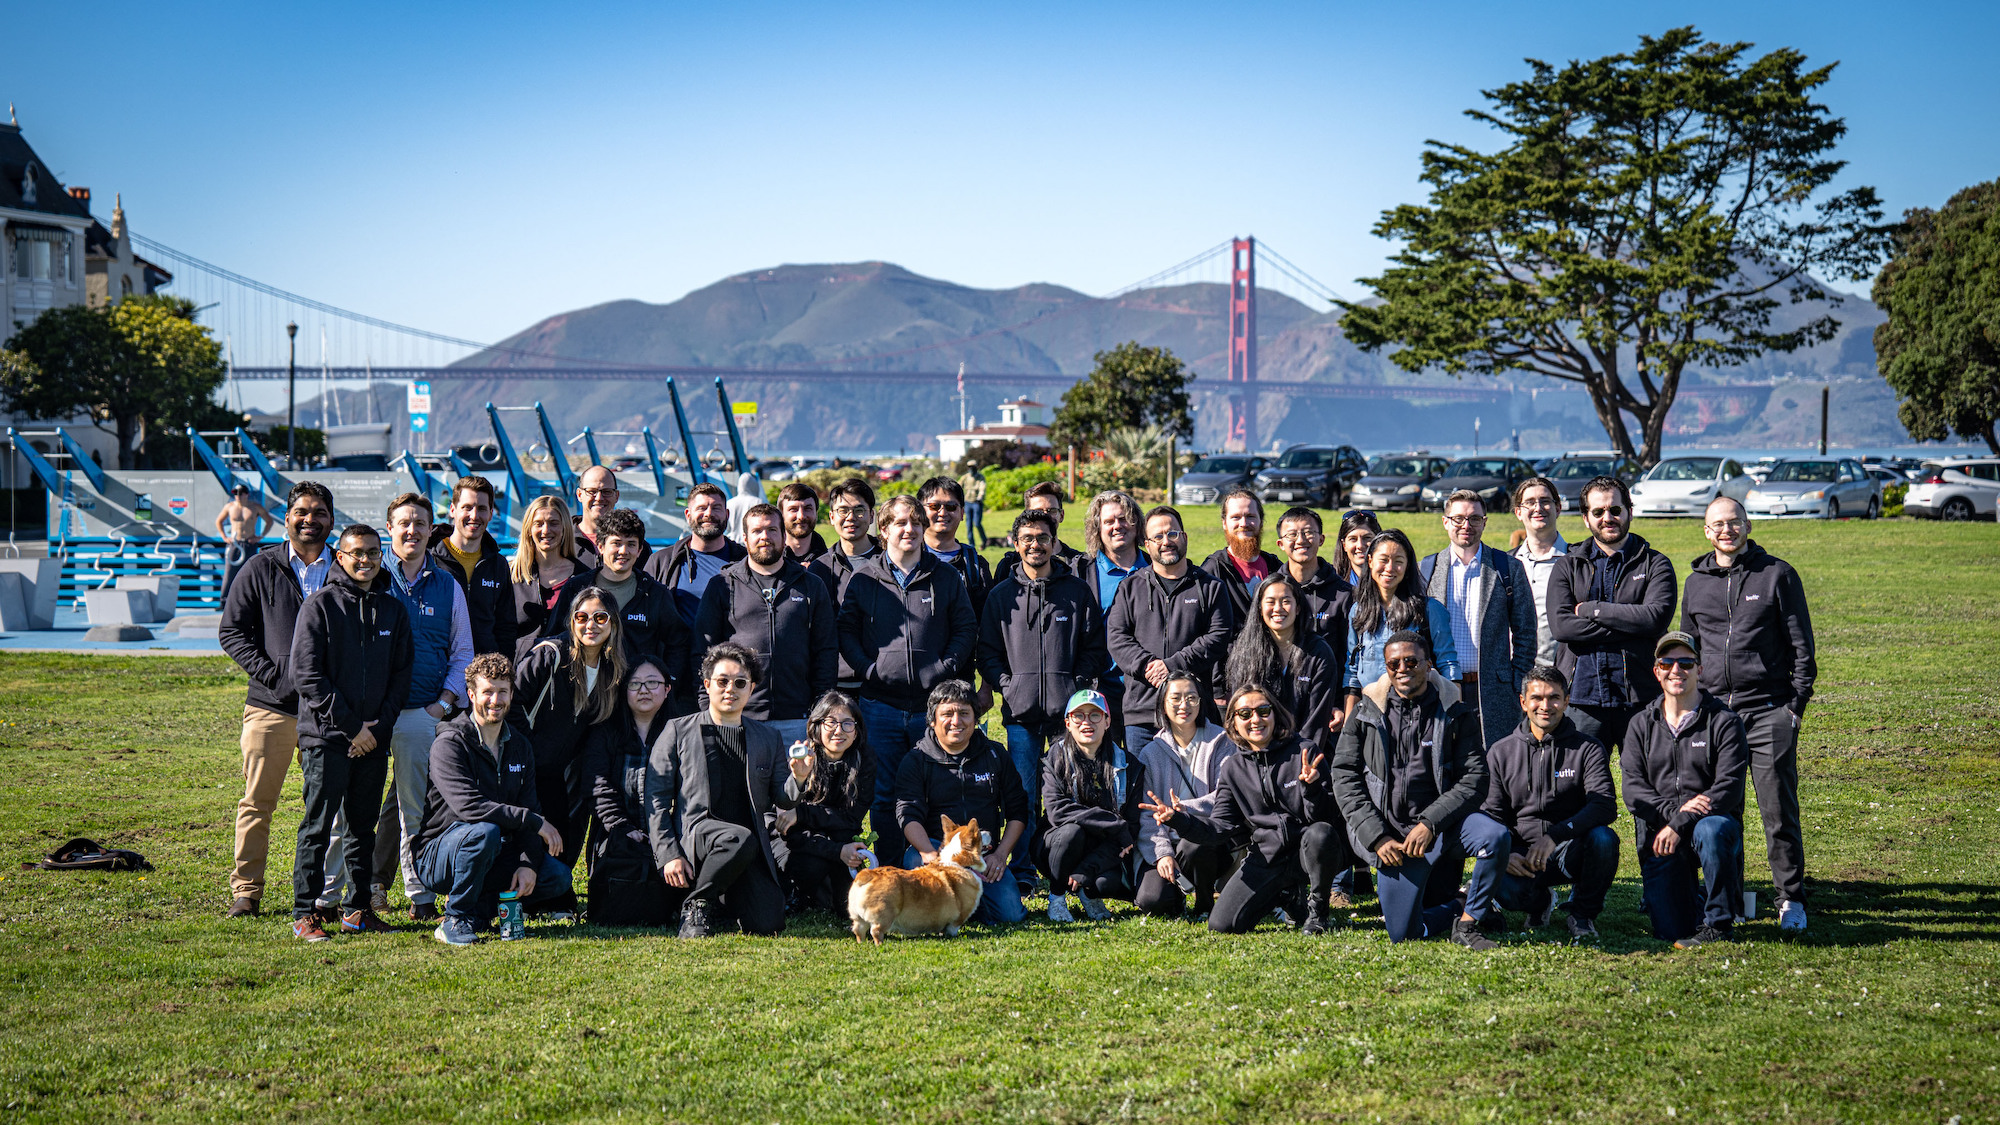 Butlr’s San Francisco and Boston team gather for a group photo outdoors.